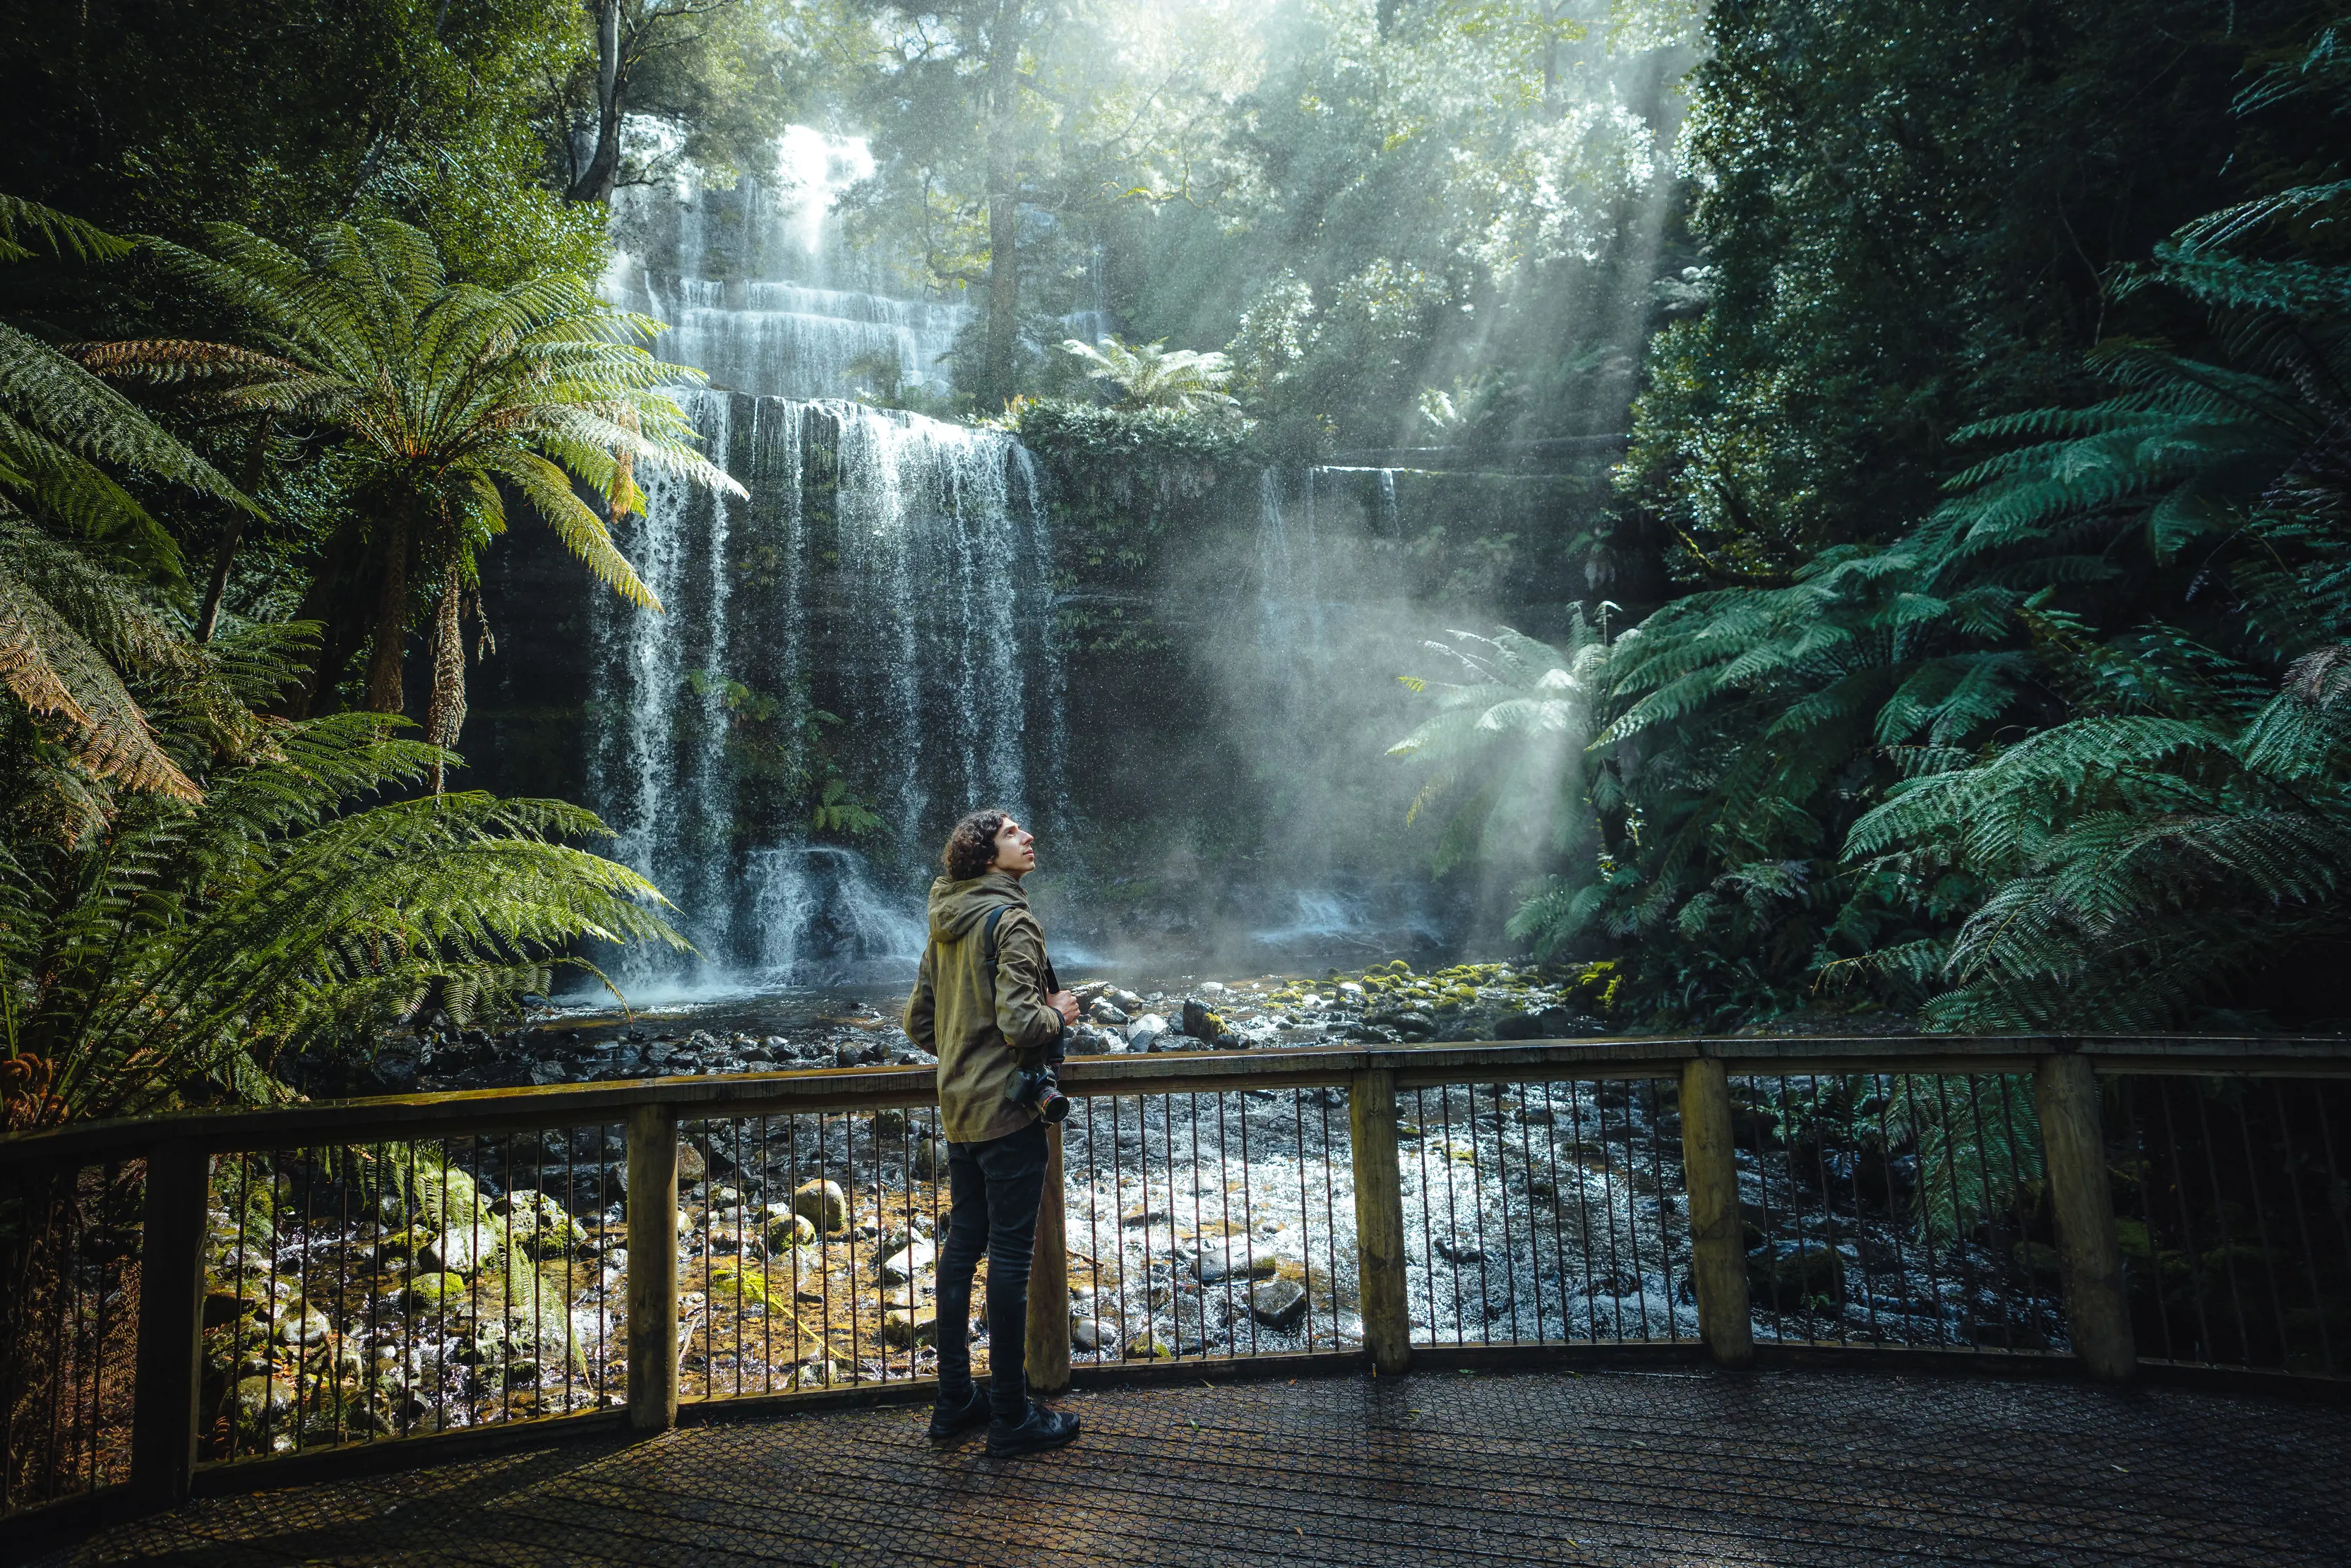 A man stood in front of Russell Falls, looking up at the fern forests and tall trees.